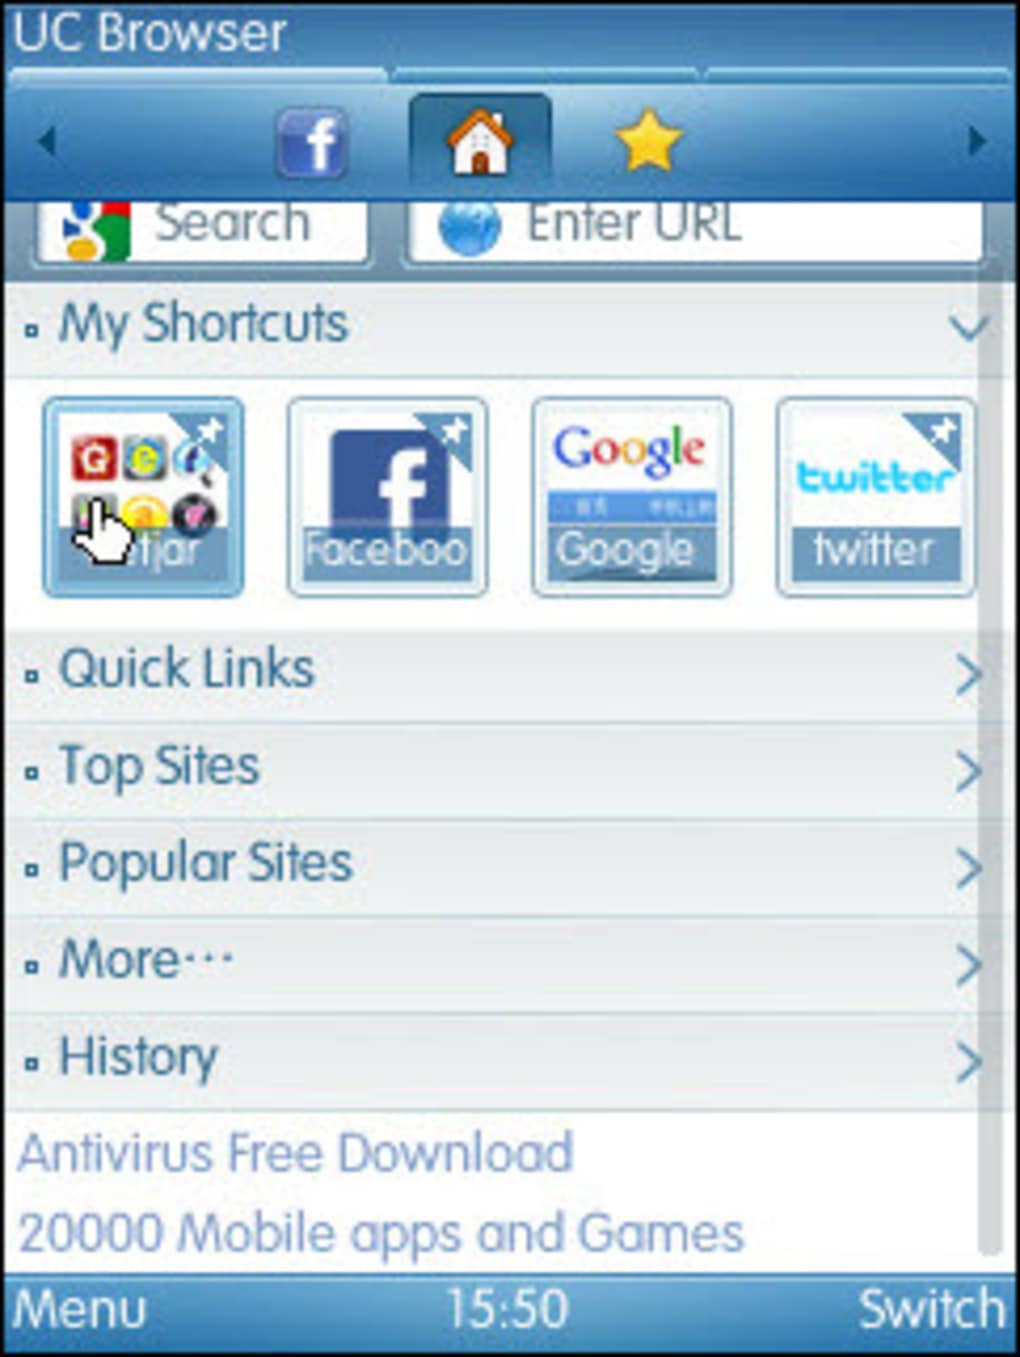 Uc Browser 1 Java App Dedomil.net : UC Browser HD Android ...